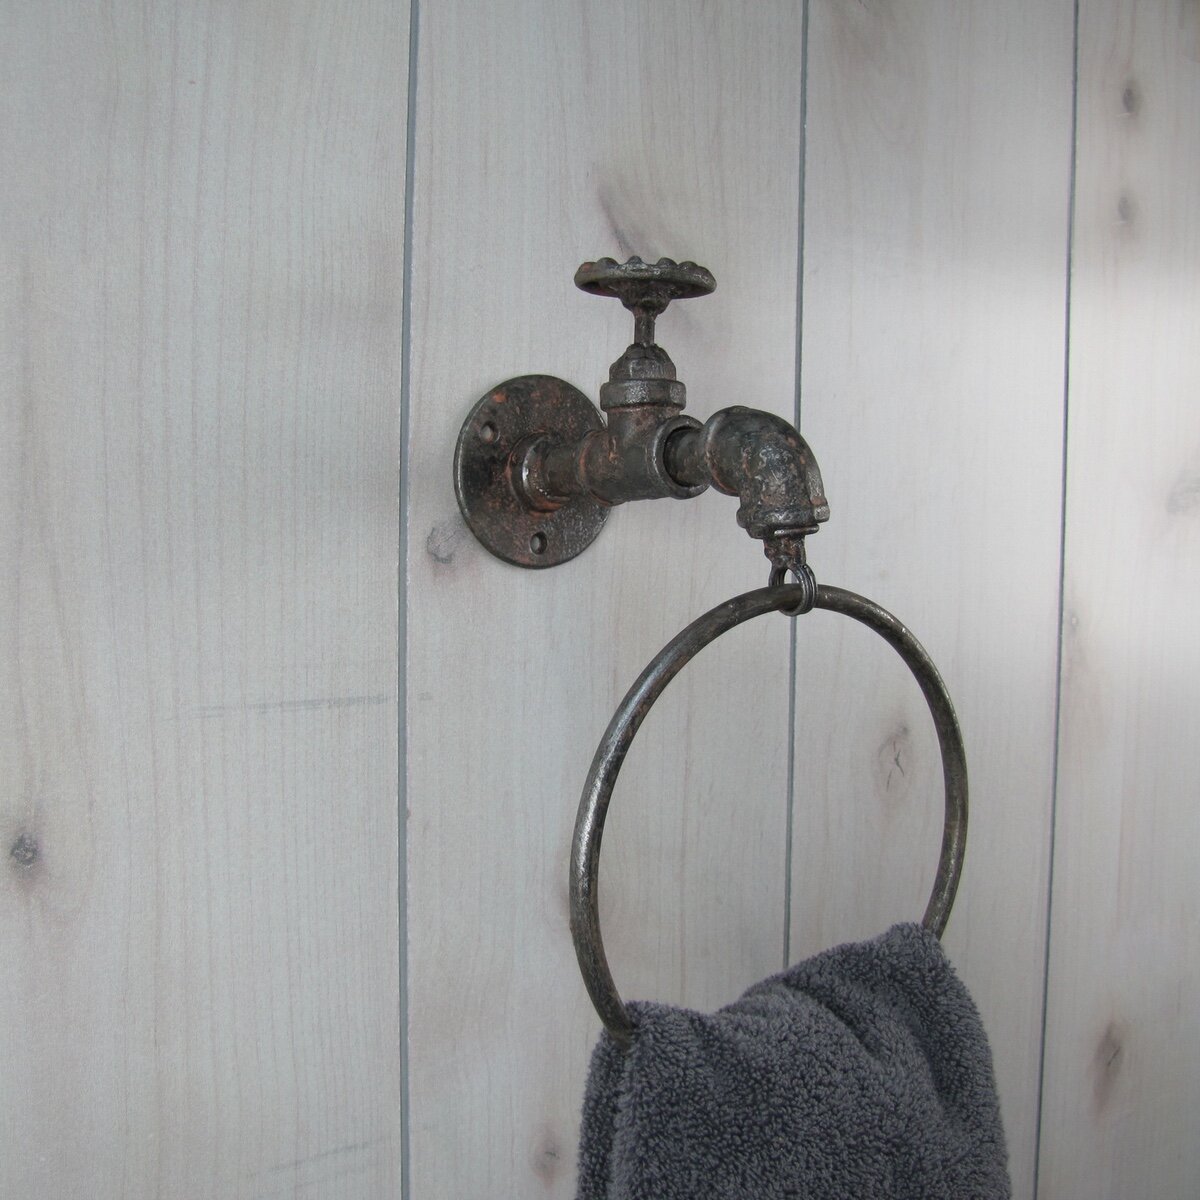 Faucet Towel Ring Hanger Rustic Cast Iron Antique Style Wall Mounted Spigot